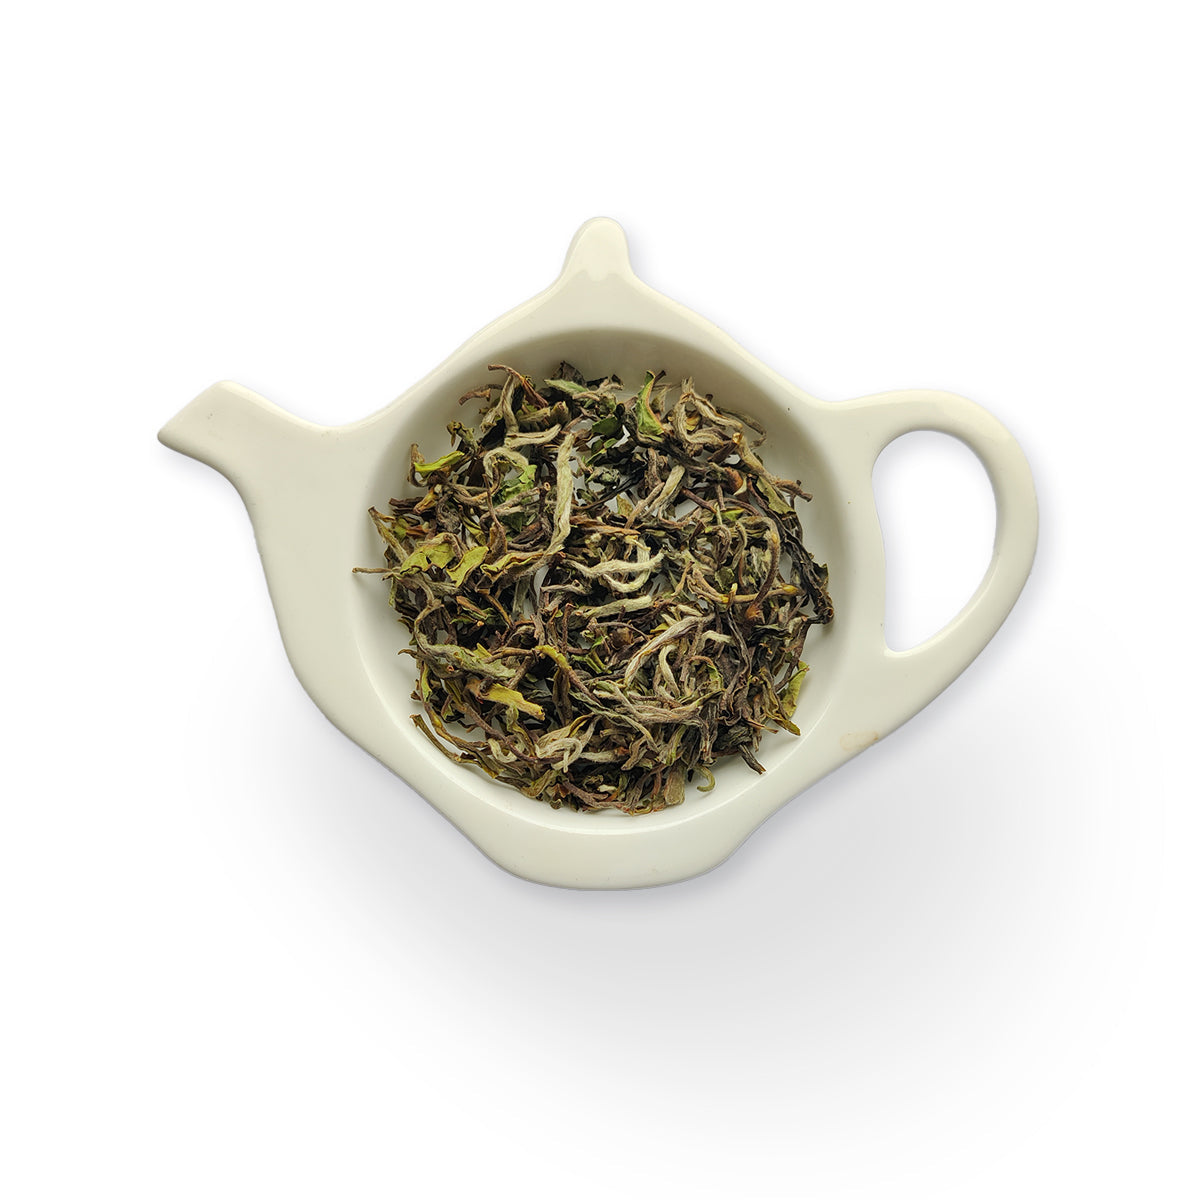 Exclusive Silver Imperial Teas